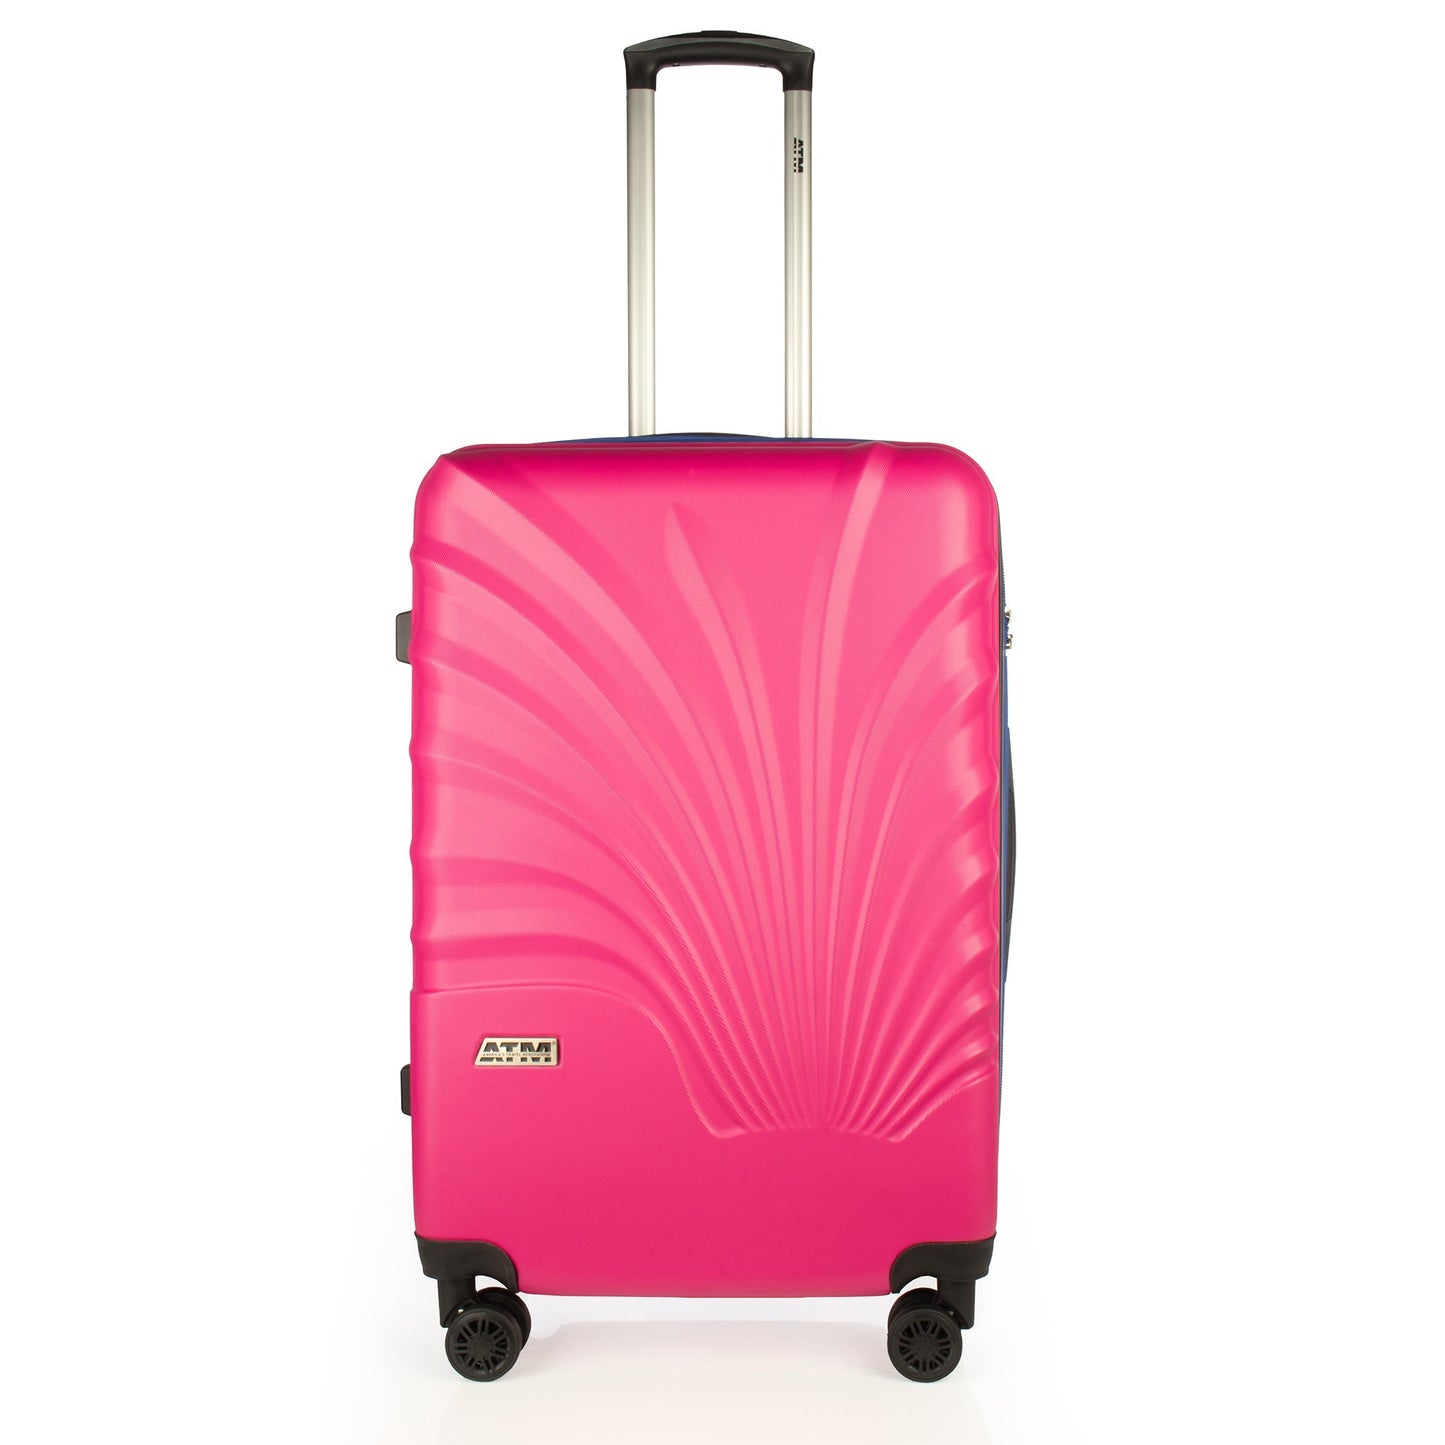 Fanciful Collection Luggage Pink (18/22/26/30") Suitcase Lock Spinner